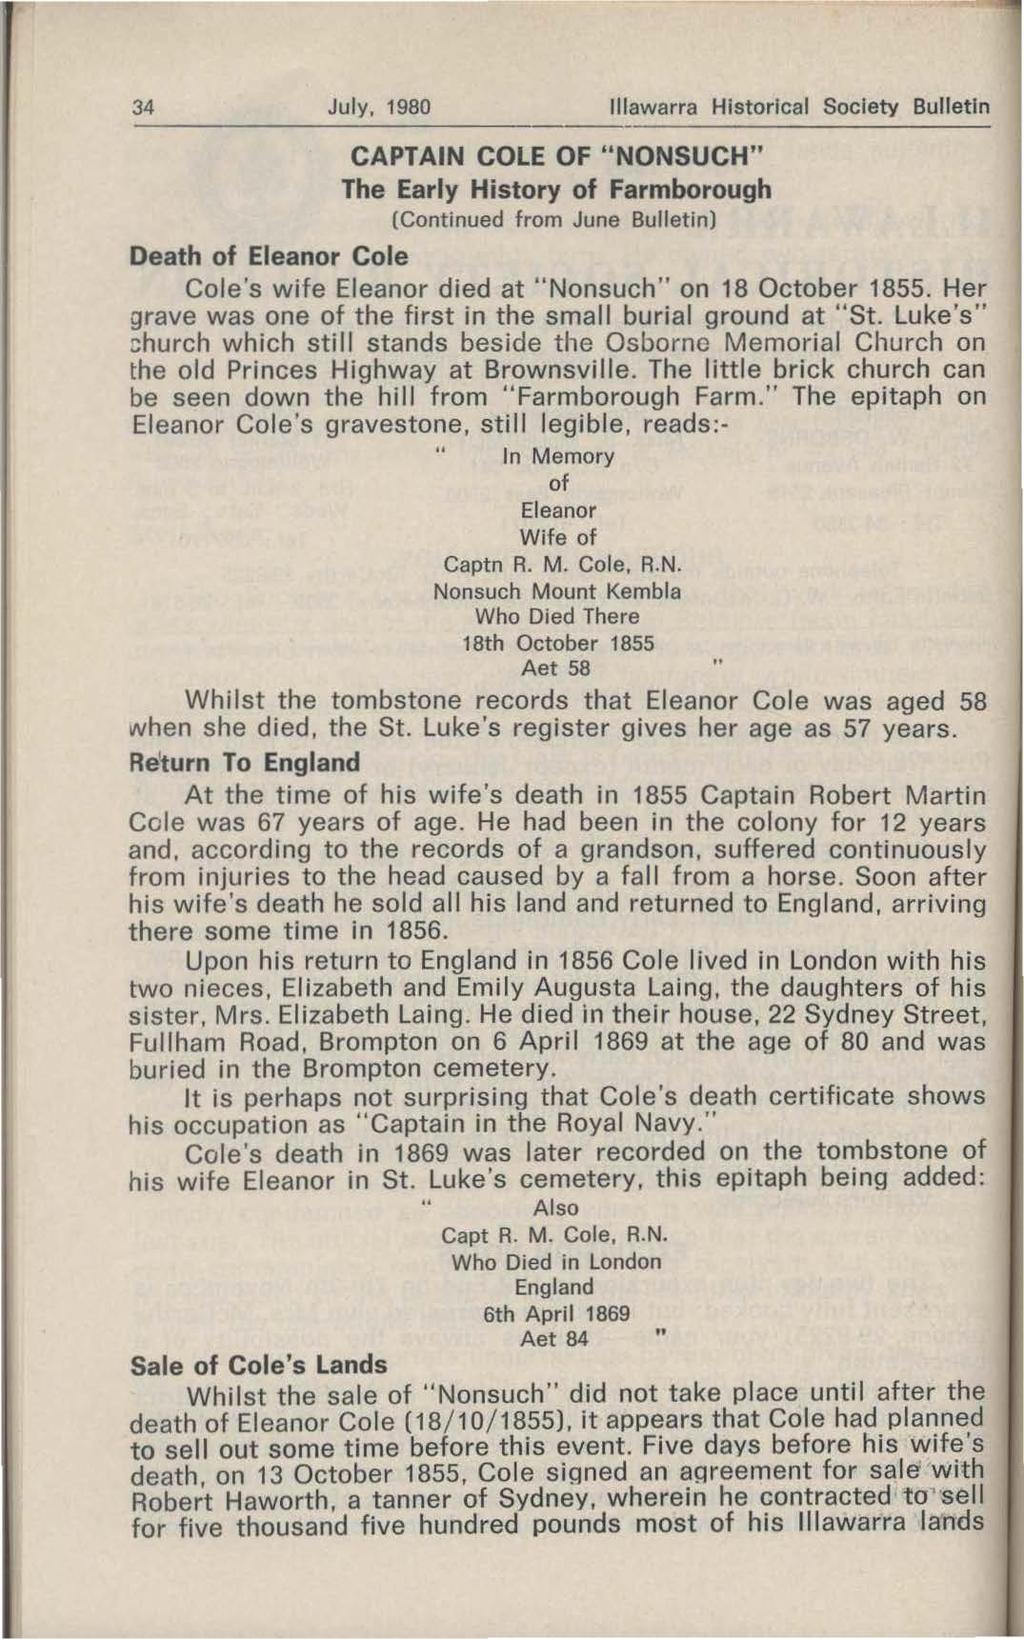 34 July, 1980 lllawarra Historical Society Bulletin ------------------------------ CAPTAIN COLE OF "NONSUCH" The Early History of Farmborough (Continued from June Bulletin) Death of Eleanor Cole